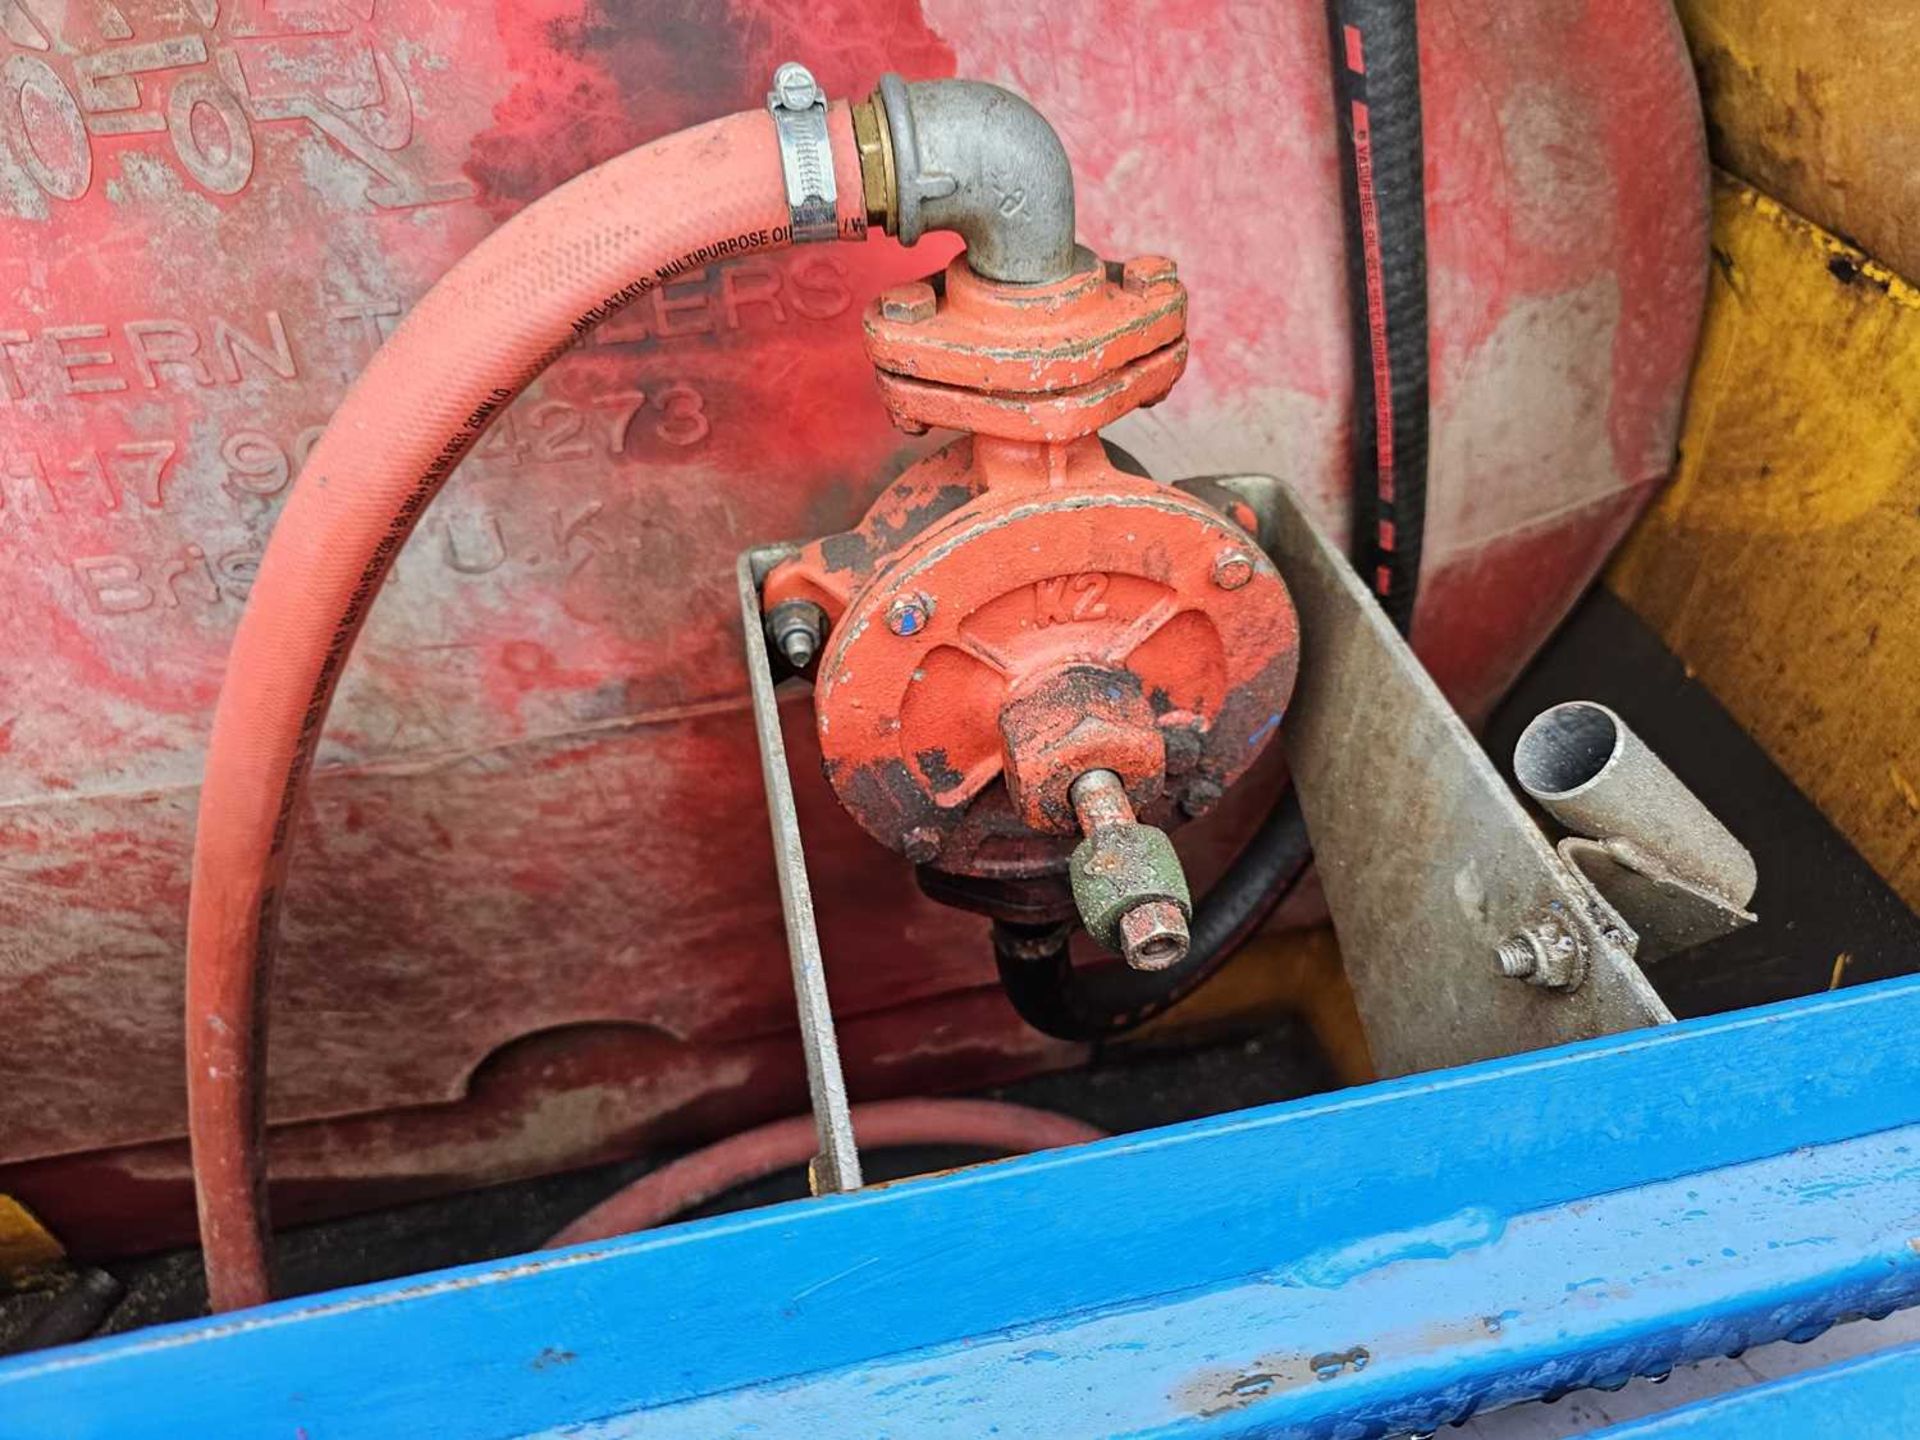 Western 2000 Litre Twin Axle Bunded Fuel Bowser, Manual Pump - Image 8 of 10